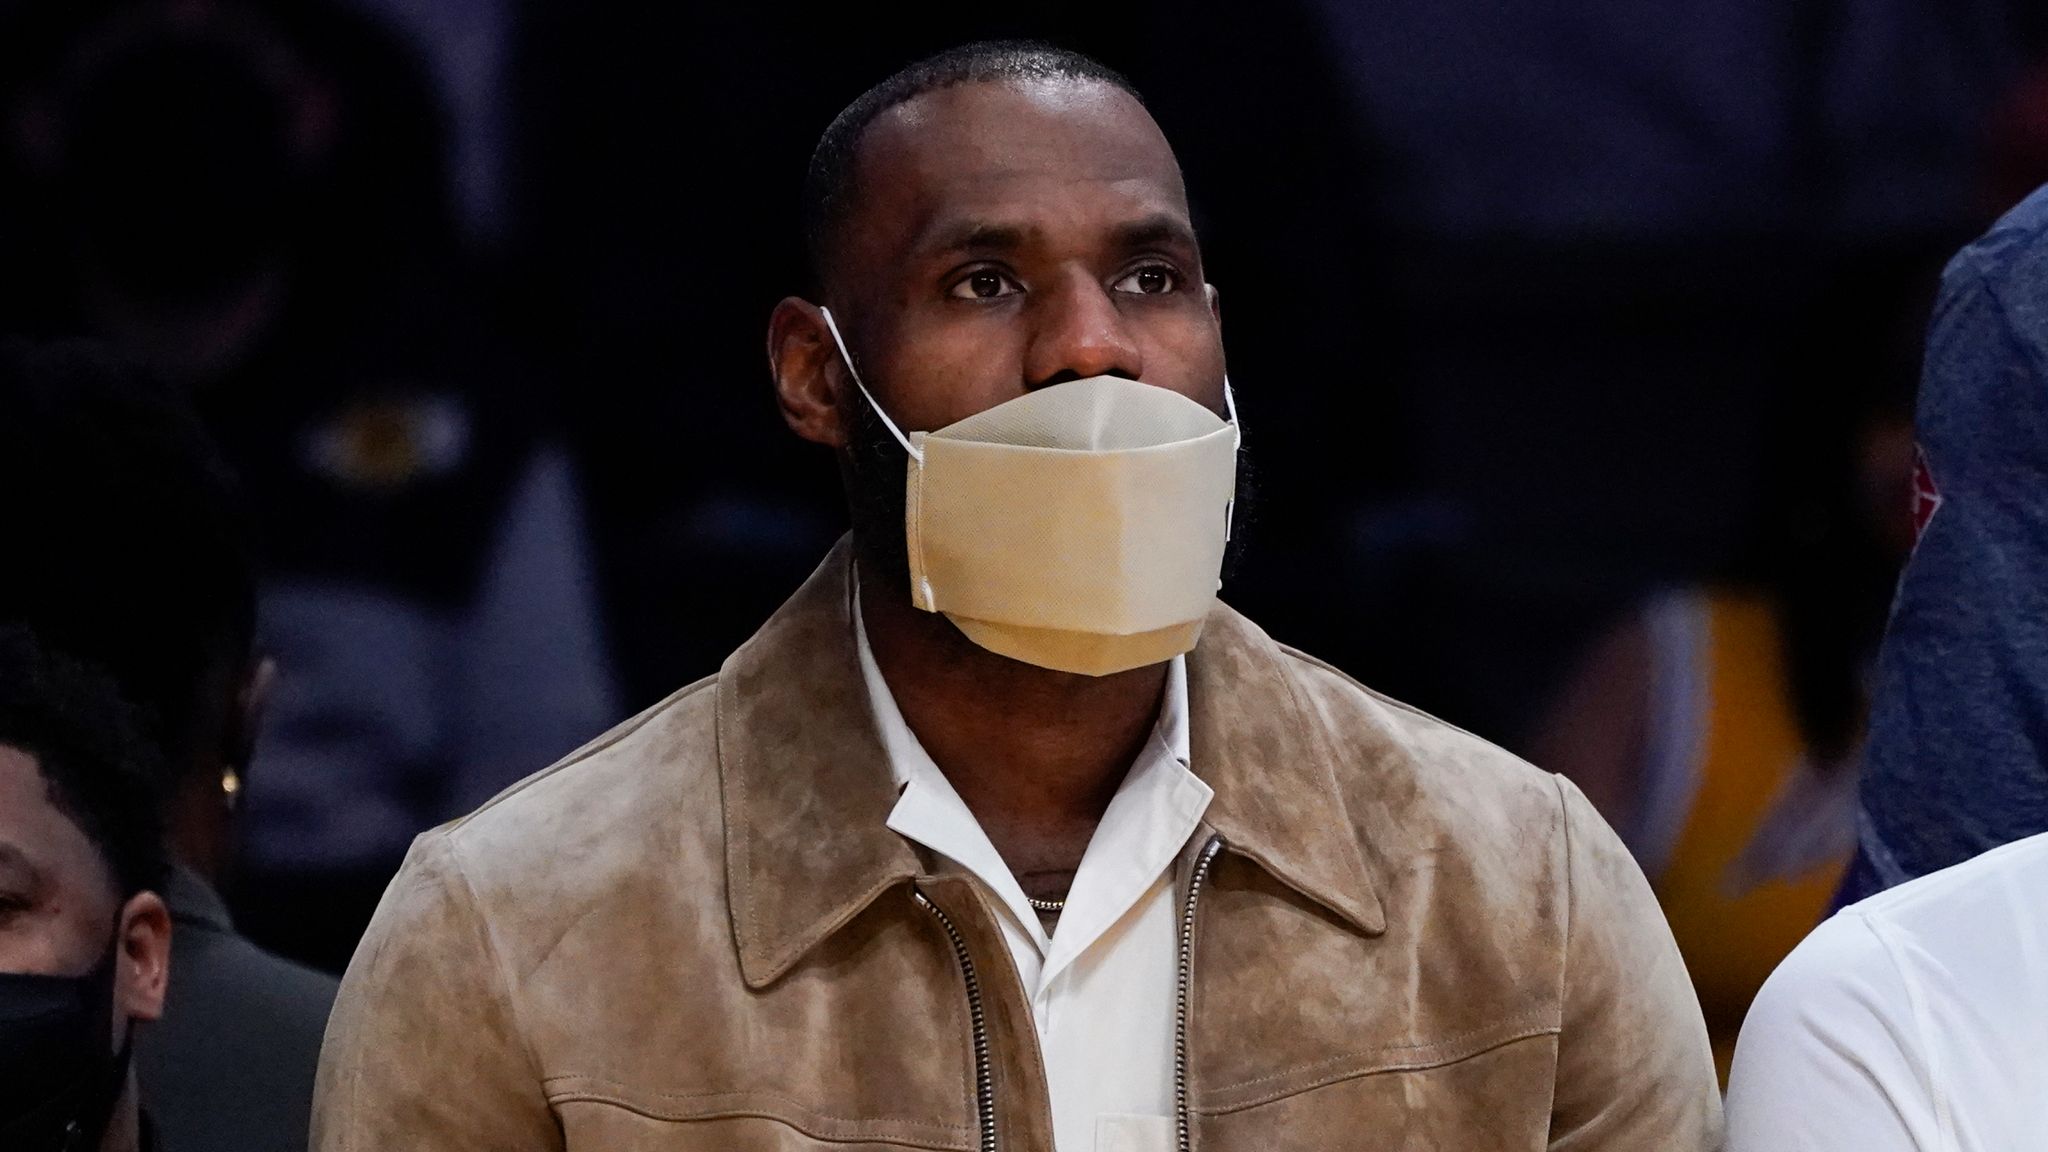 Los Angeles Lakers' LeBron James in health and safety protocols; expected  to miss several games, sources say - ESPN